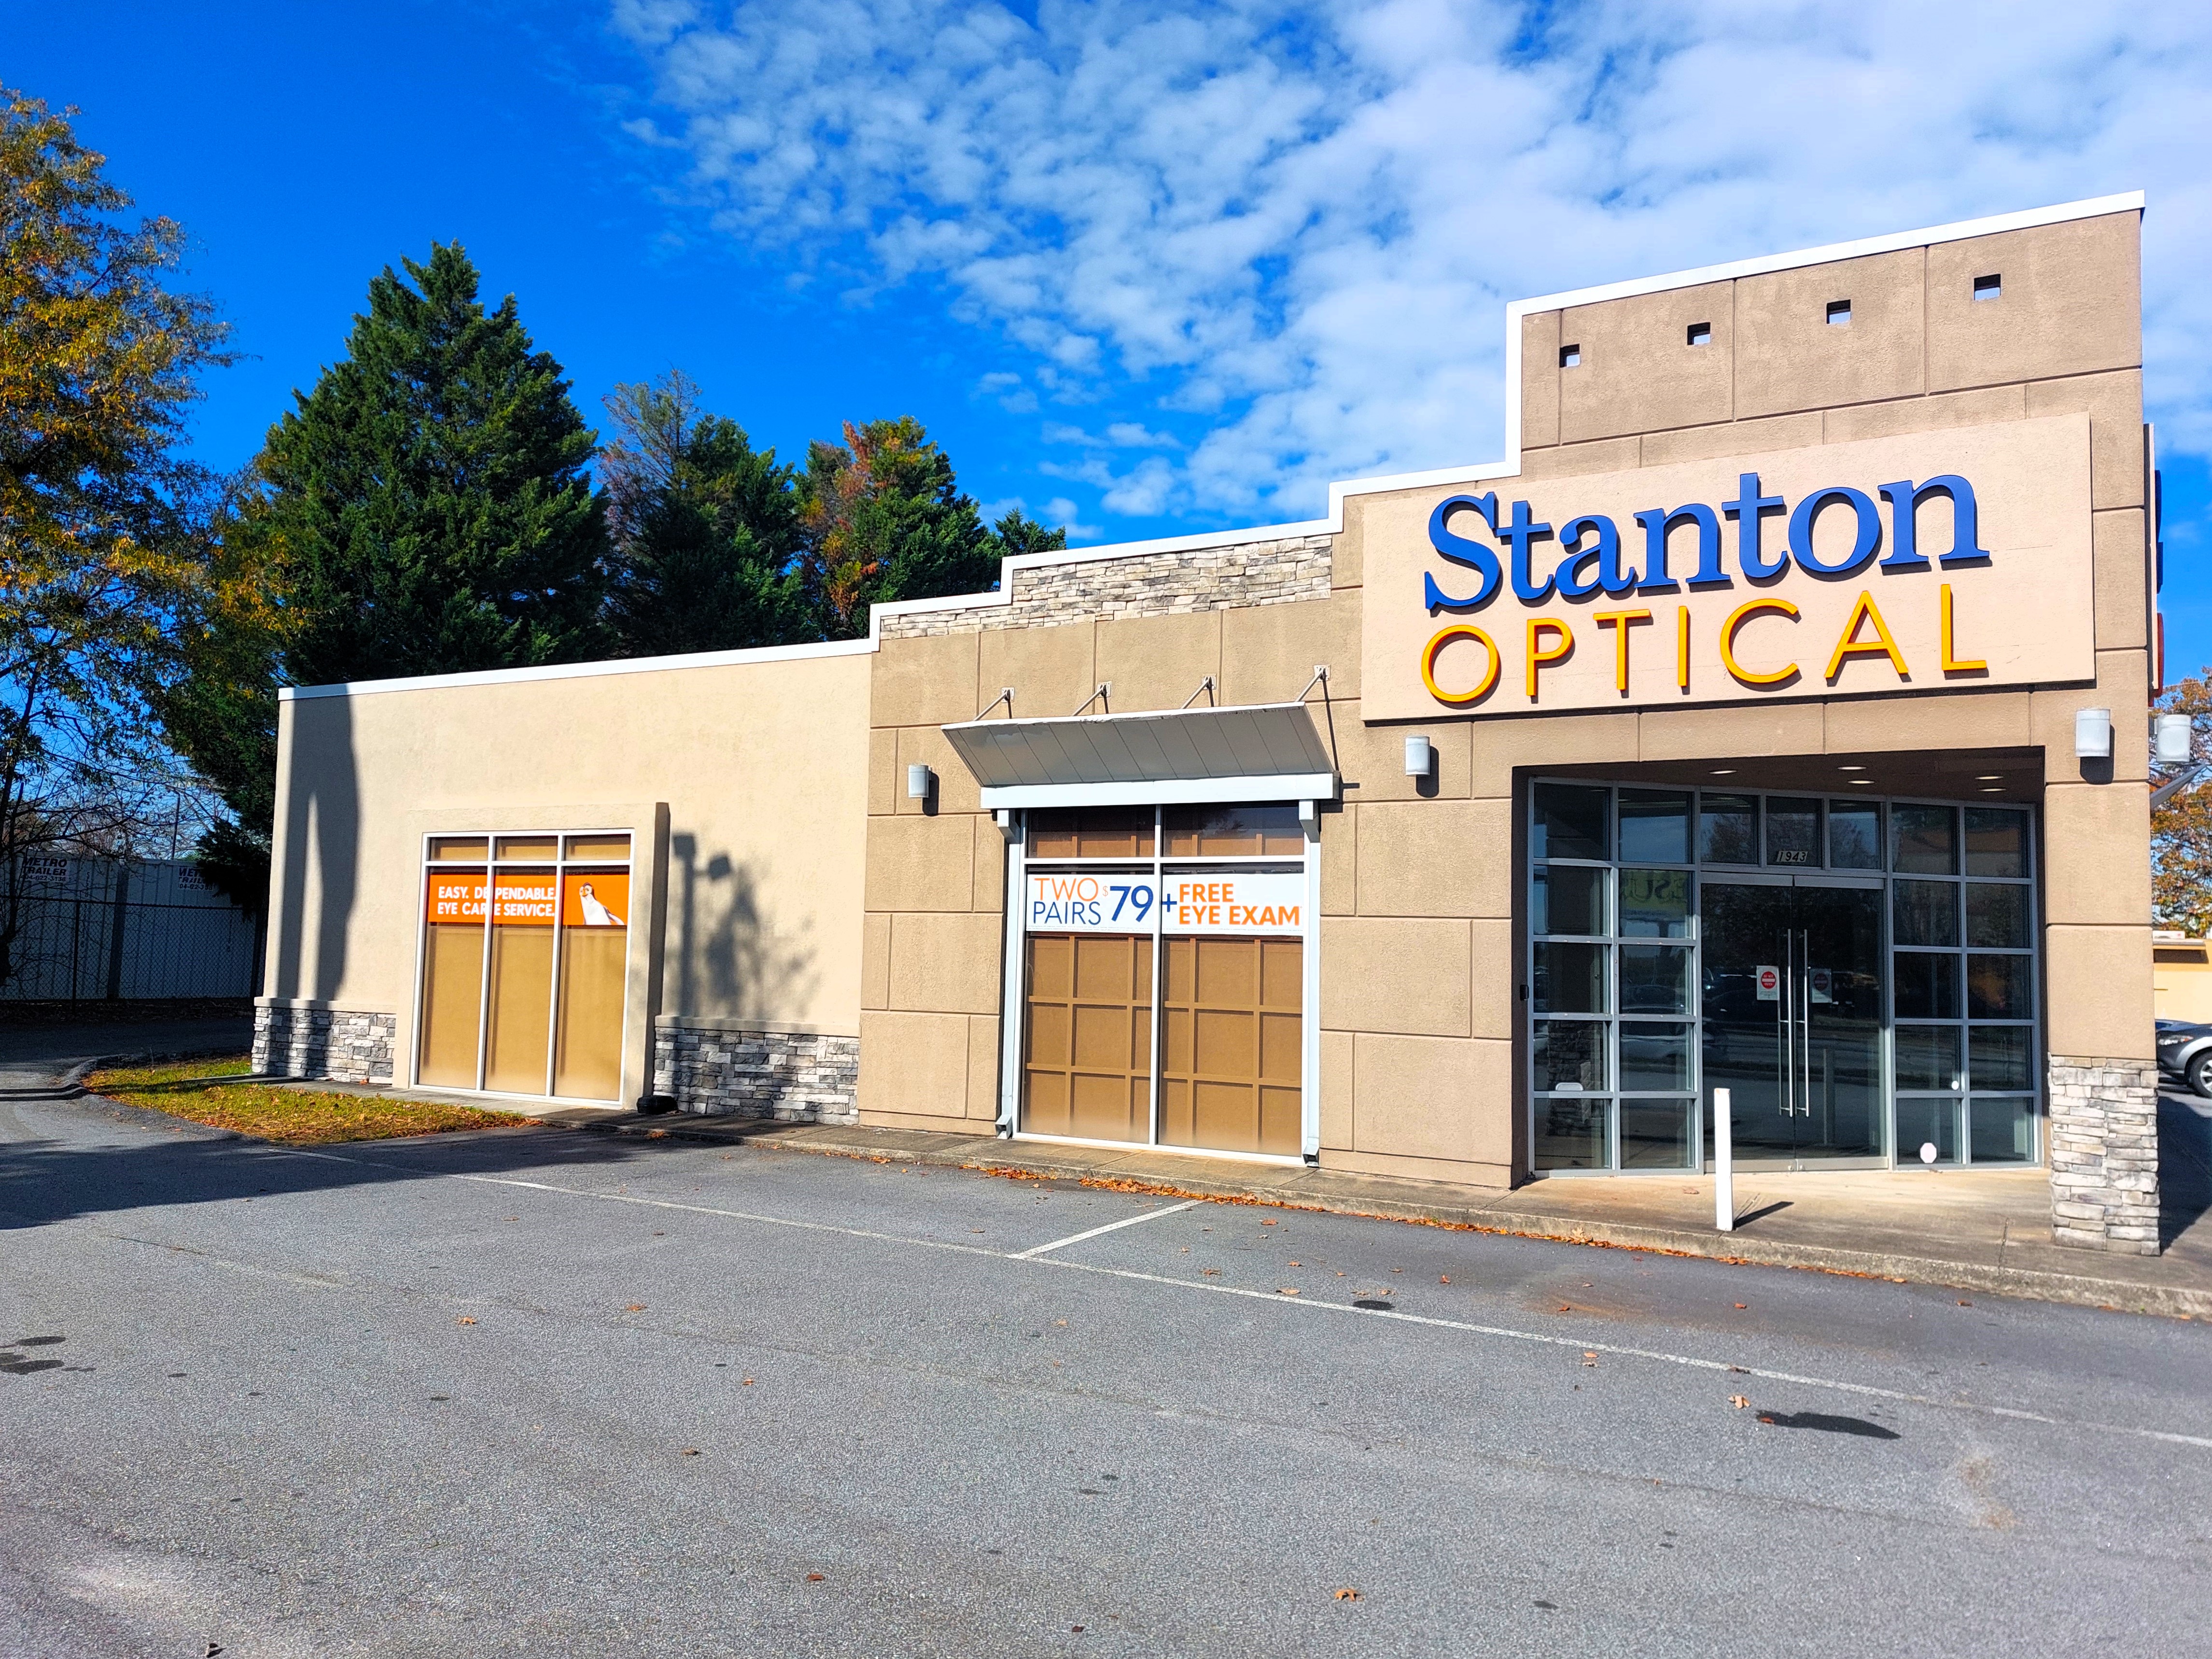 Storefront at Stanton Optical store in Duluth, GA 30096